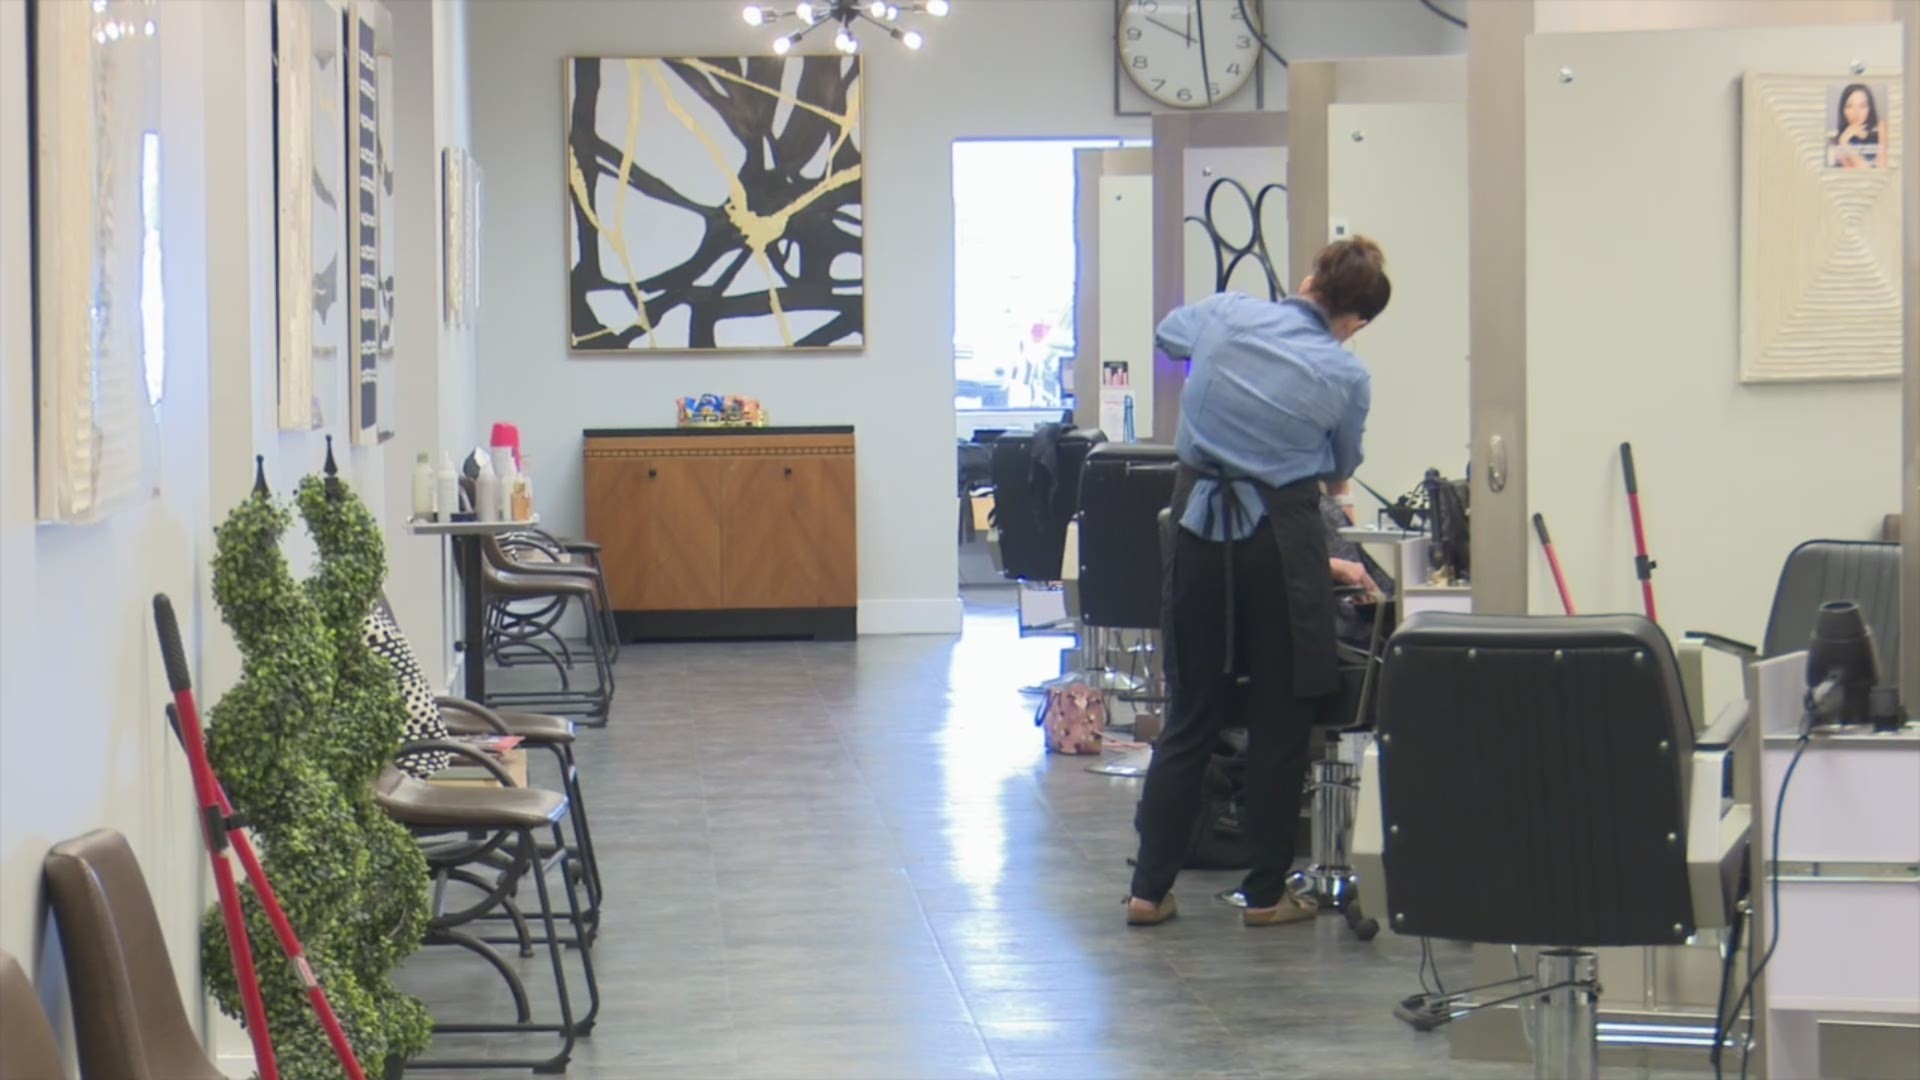 At Macon salons, chairs that are usually full, are now sitting empty.